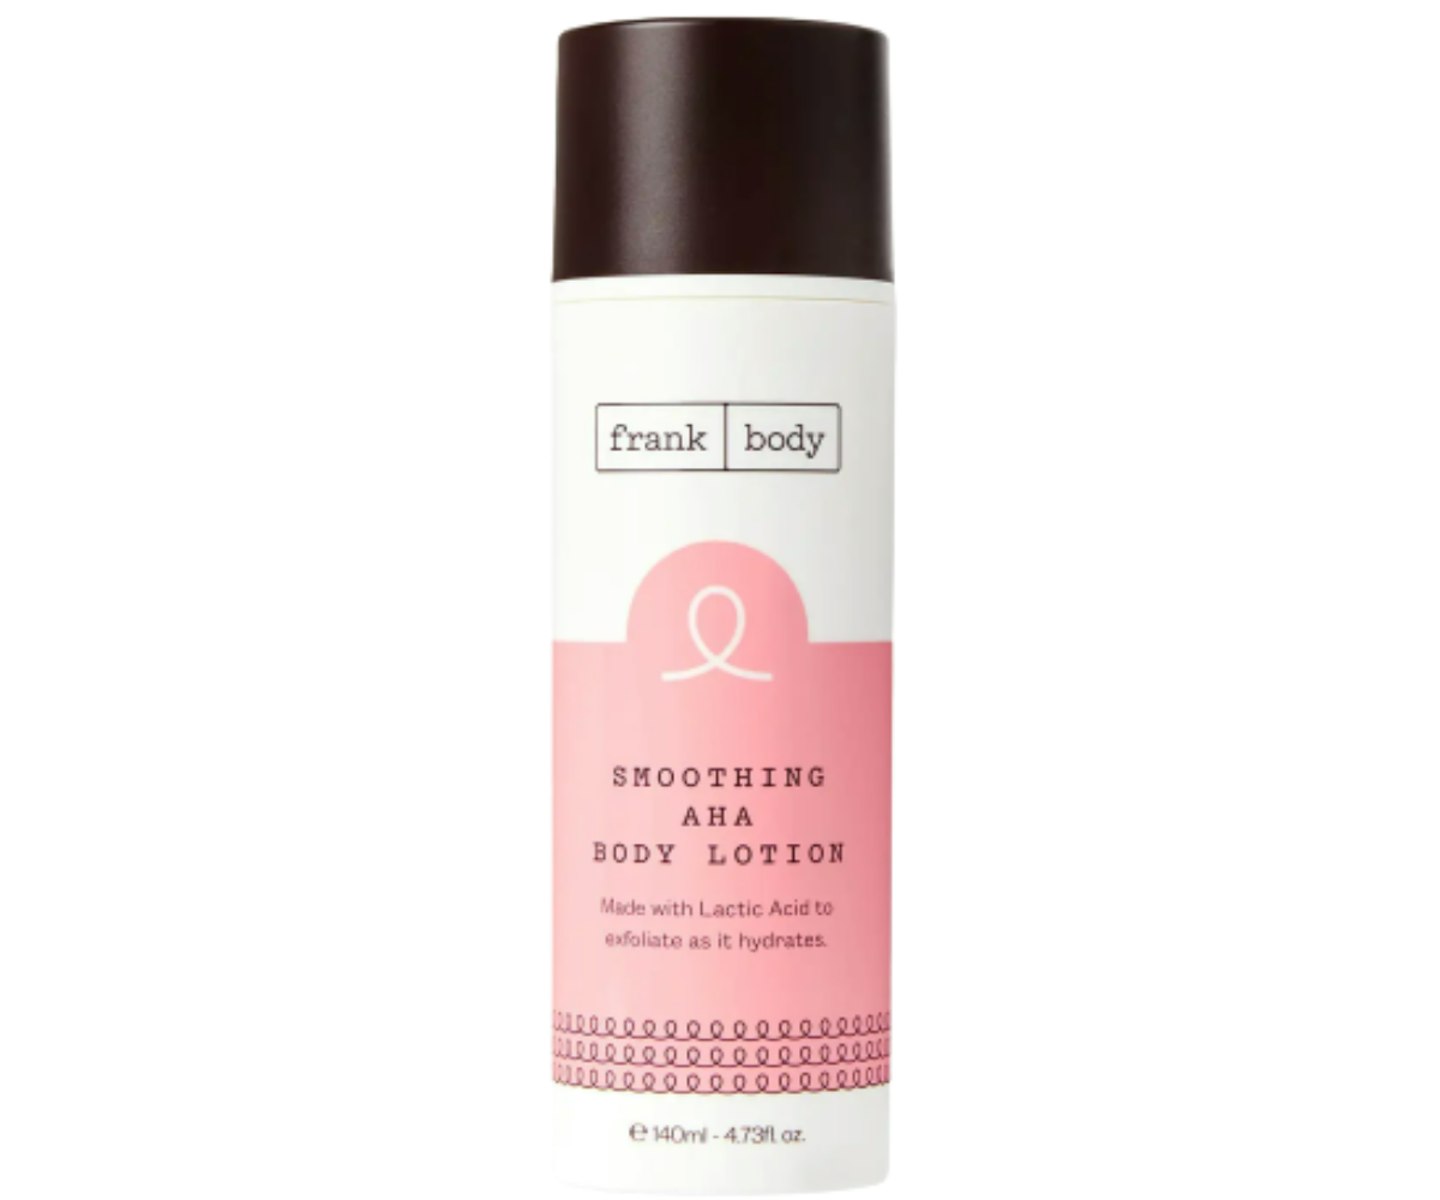 A picture of the Frank Body Smoothing AHA Body Lotion